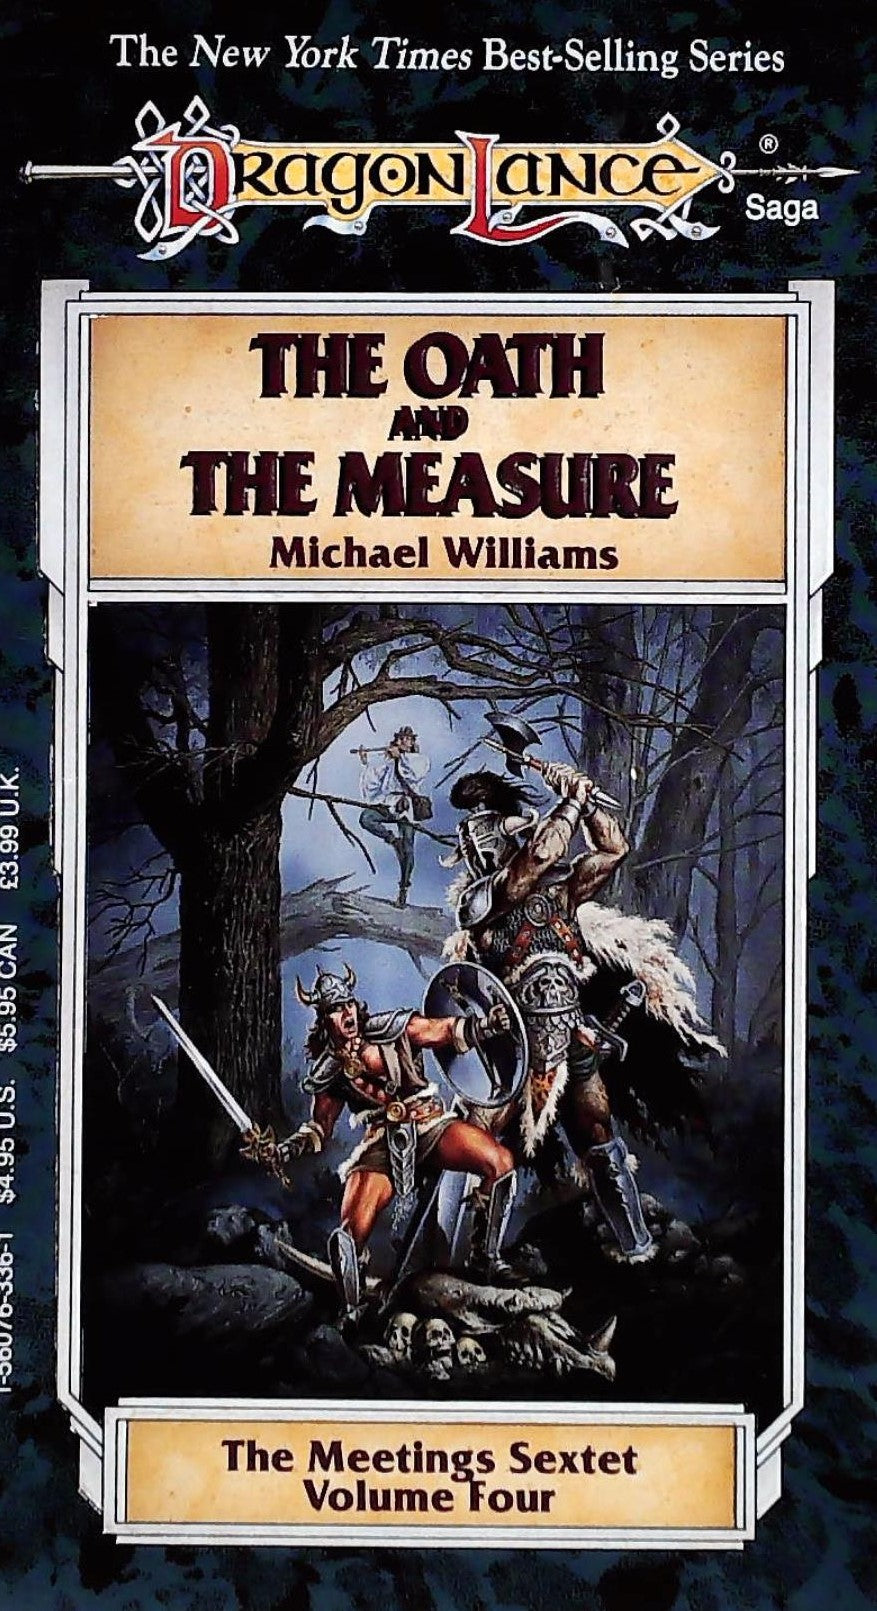 Livre ISBN 1560763361 DragonLance : The Meetings Sextet # 4 : The Oath and the Measure (Michael Williams)